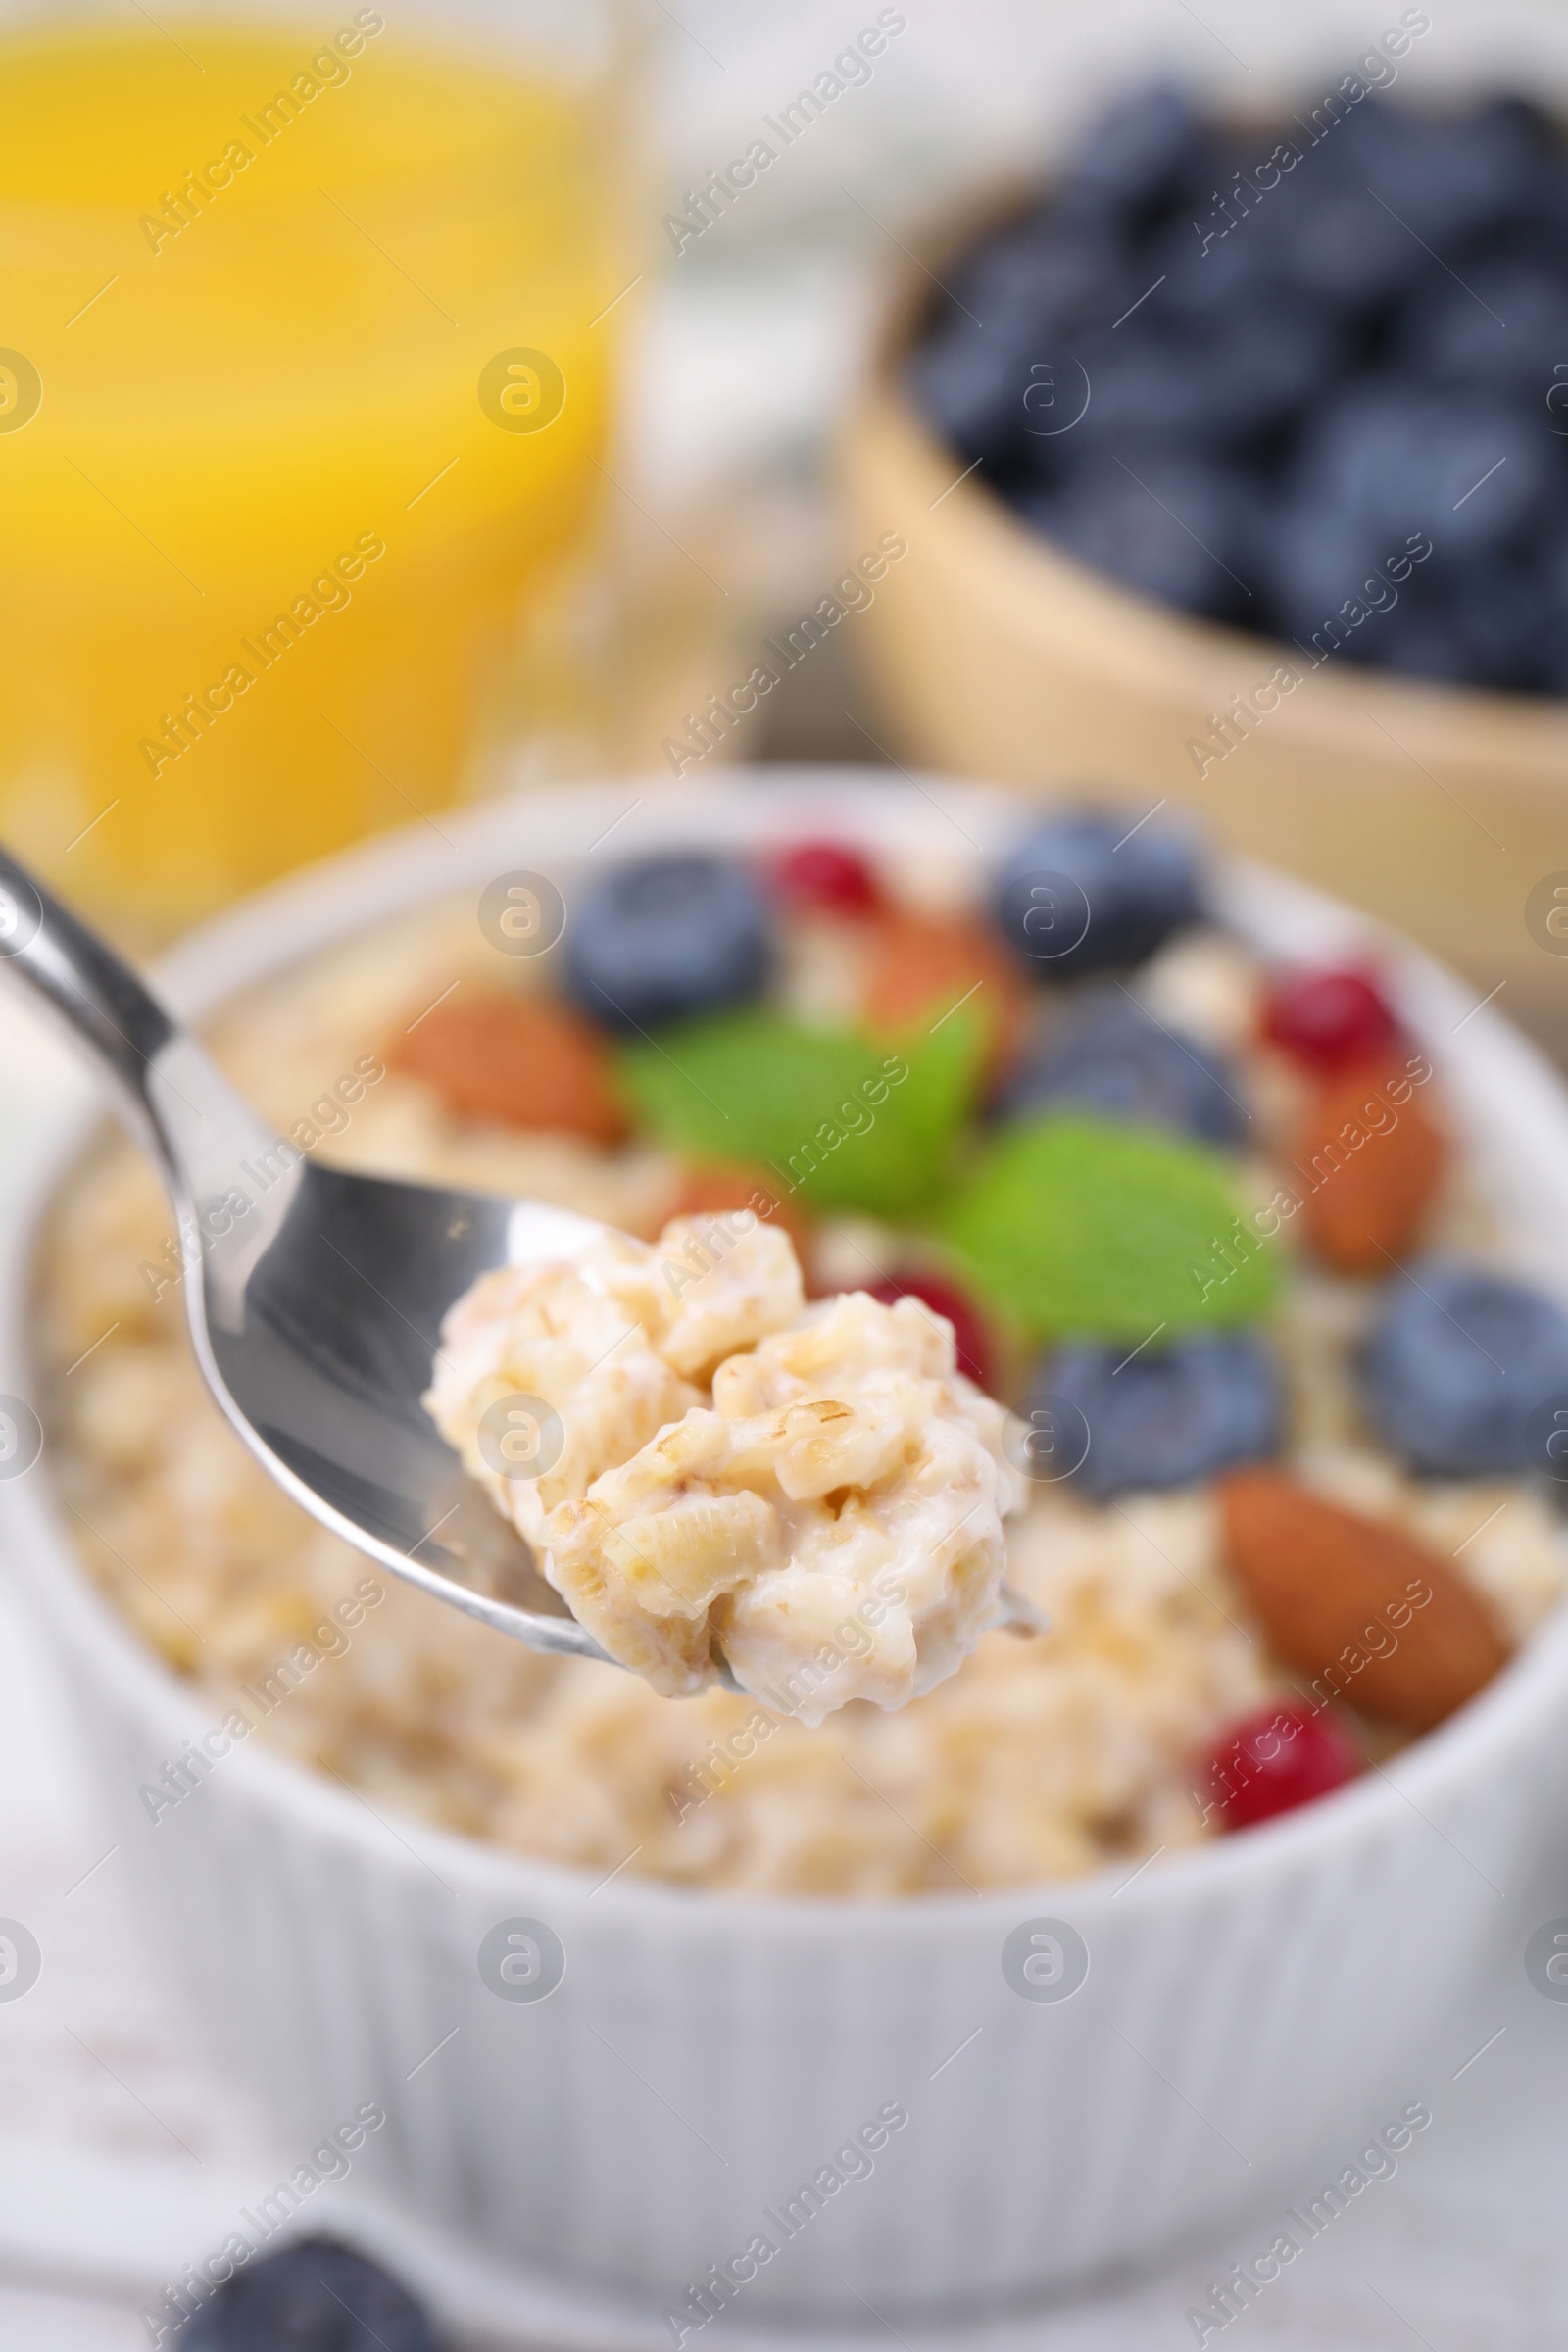 Photo of Spoon of oatmeal at table, closeup view